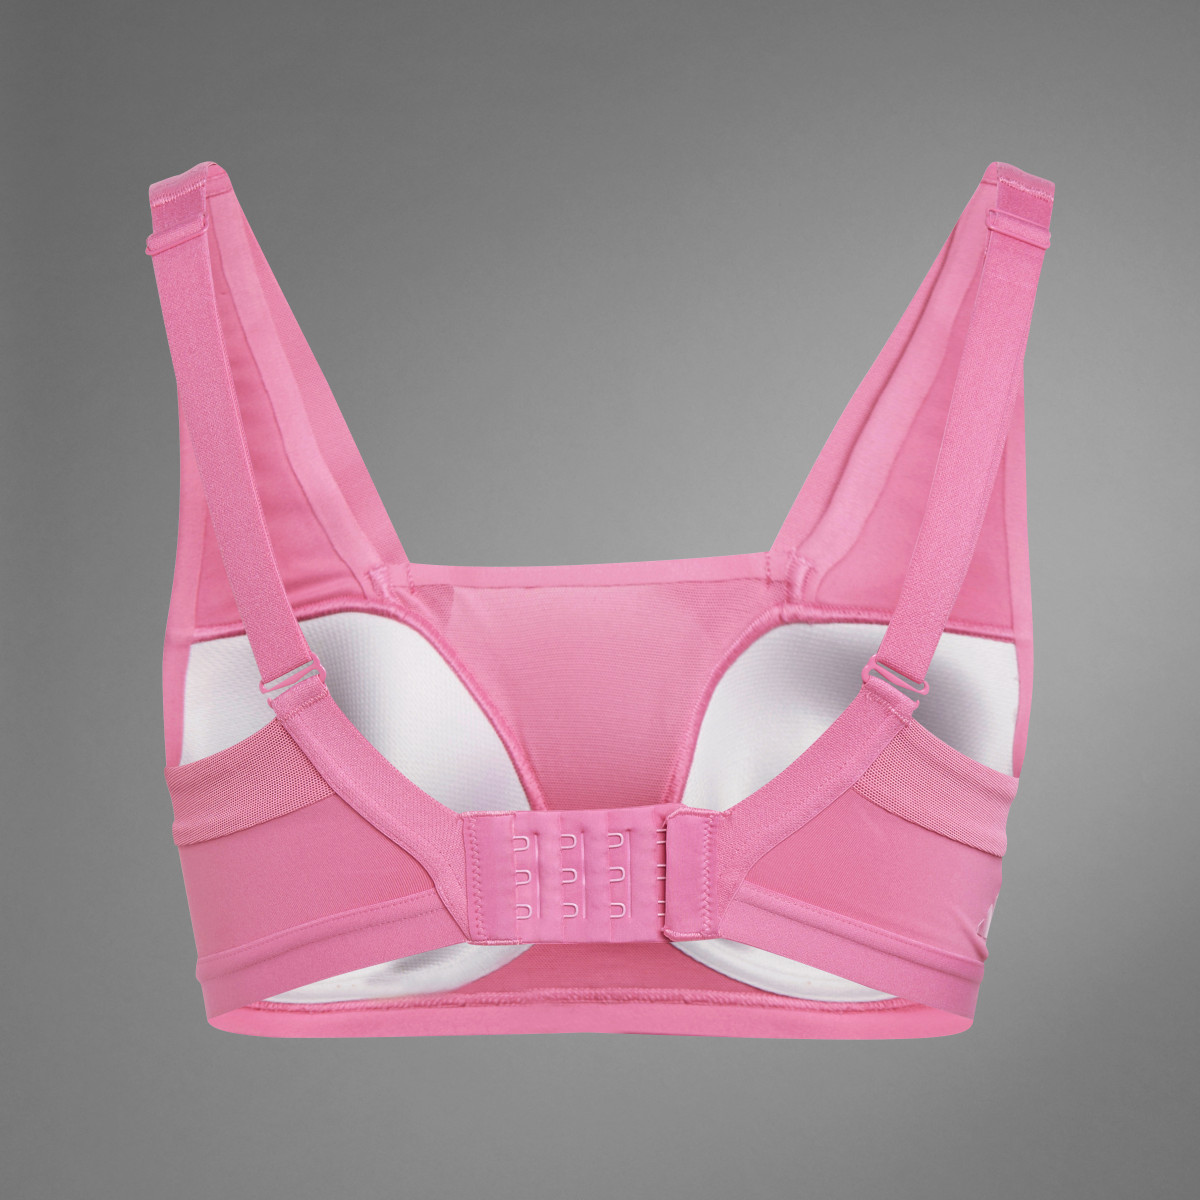 Adidas Brassière de training TLRD Impact Luxe Collective Power Maintien fort. 11